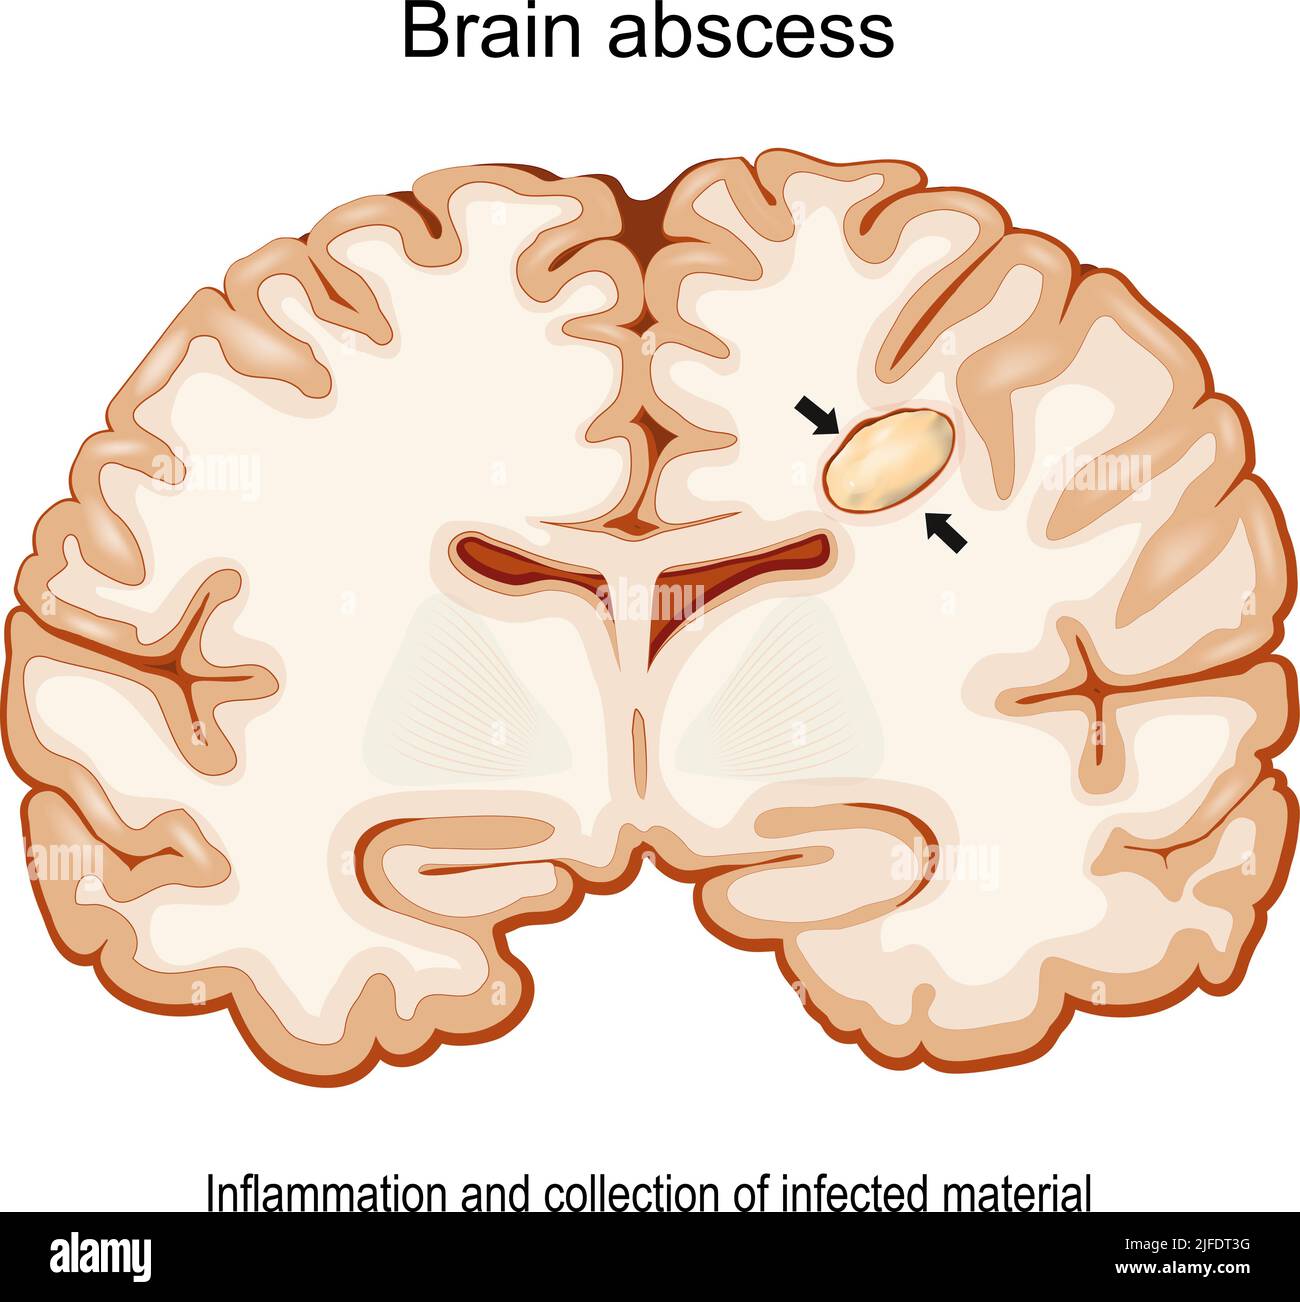 Brain abscess. Cerebral abscess. Infectious Diseases of the Brain. Cross section of a human brain with intracerebral collection of pus. Vector poster Stock Vector